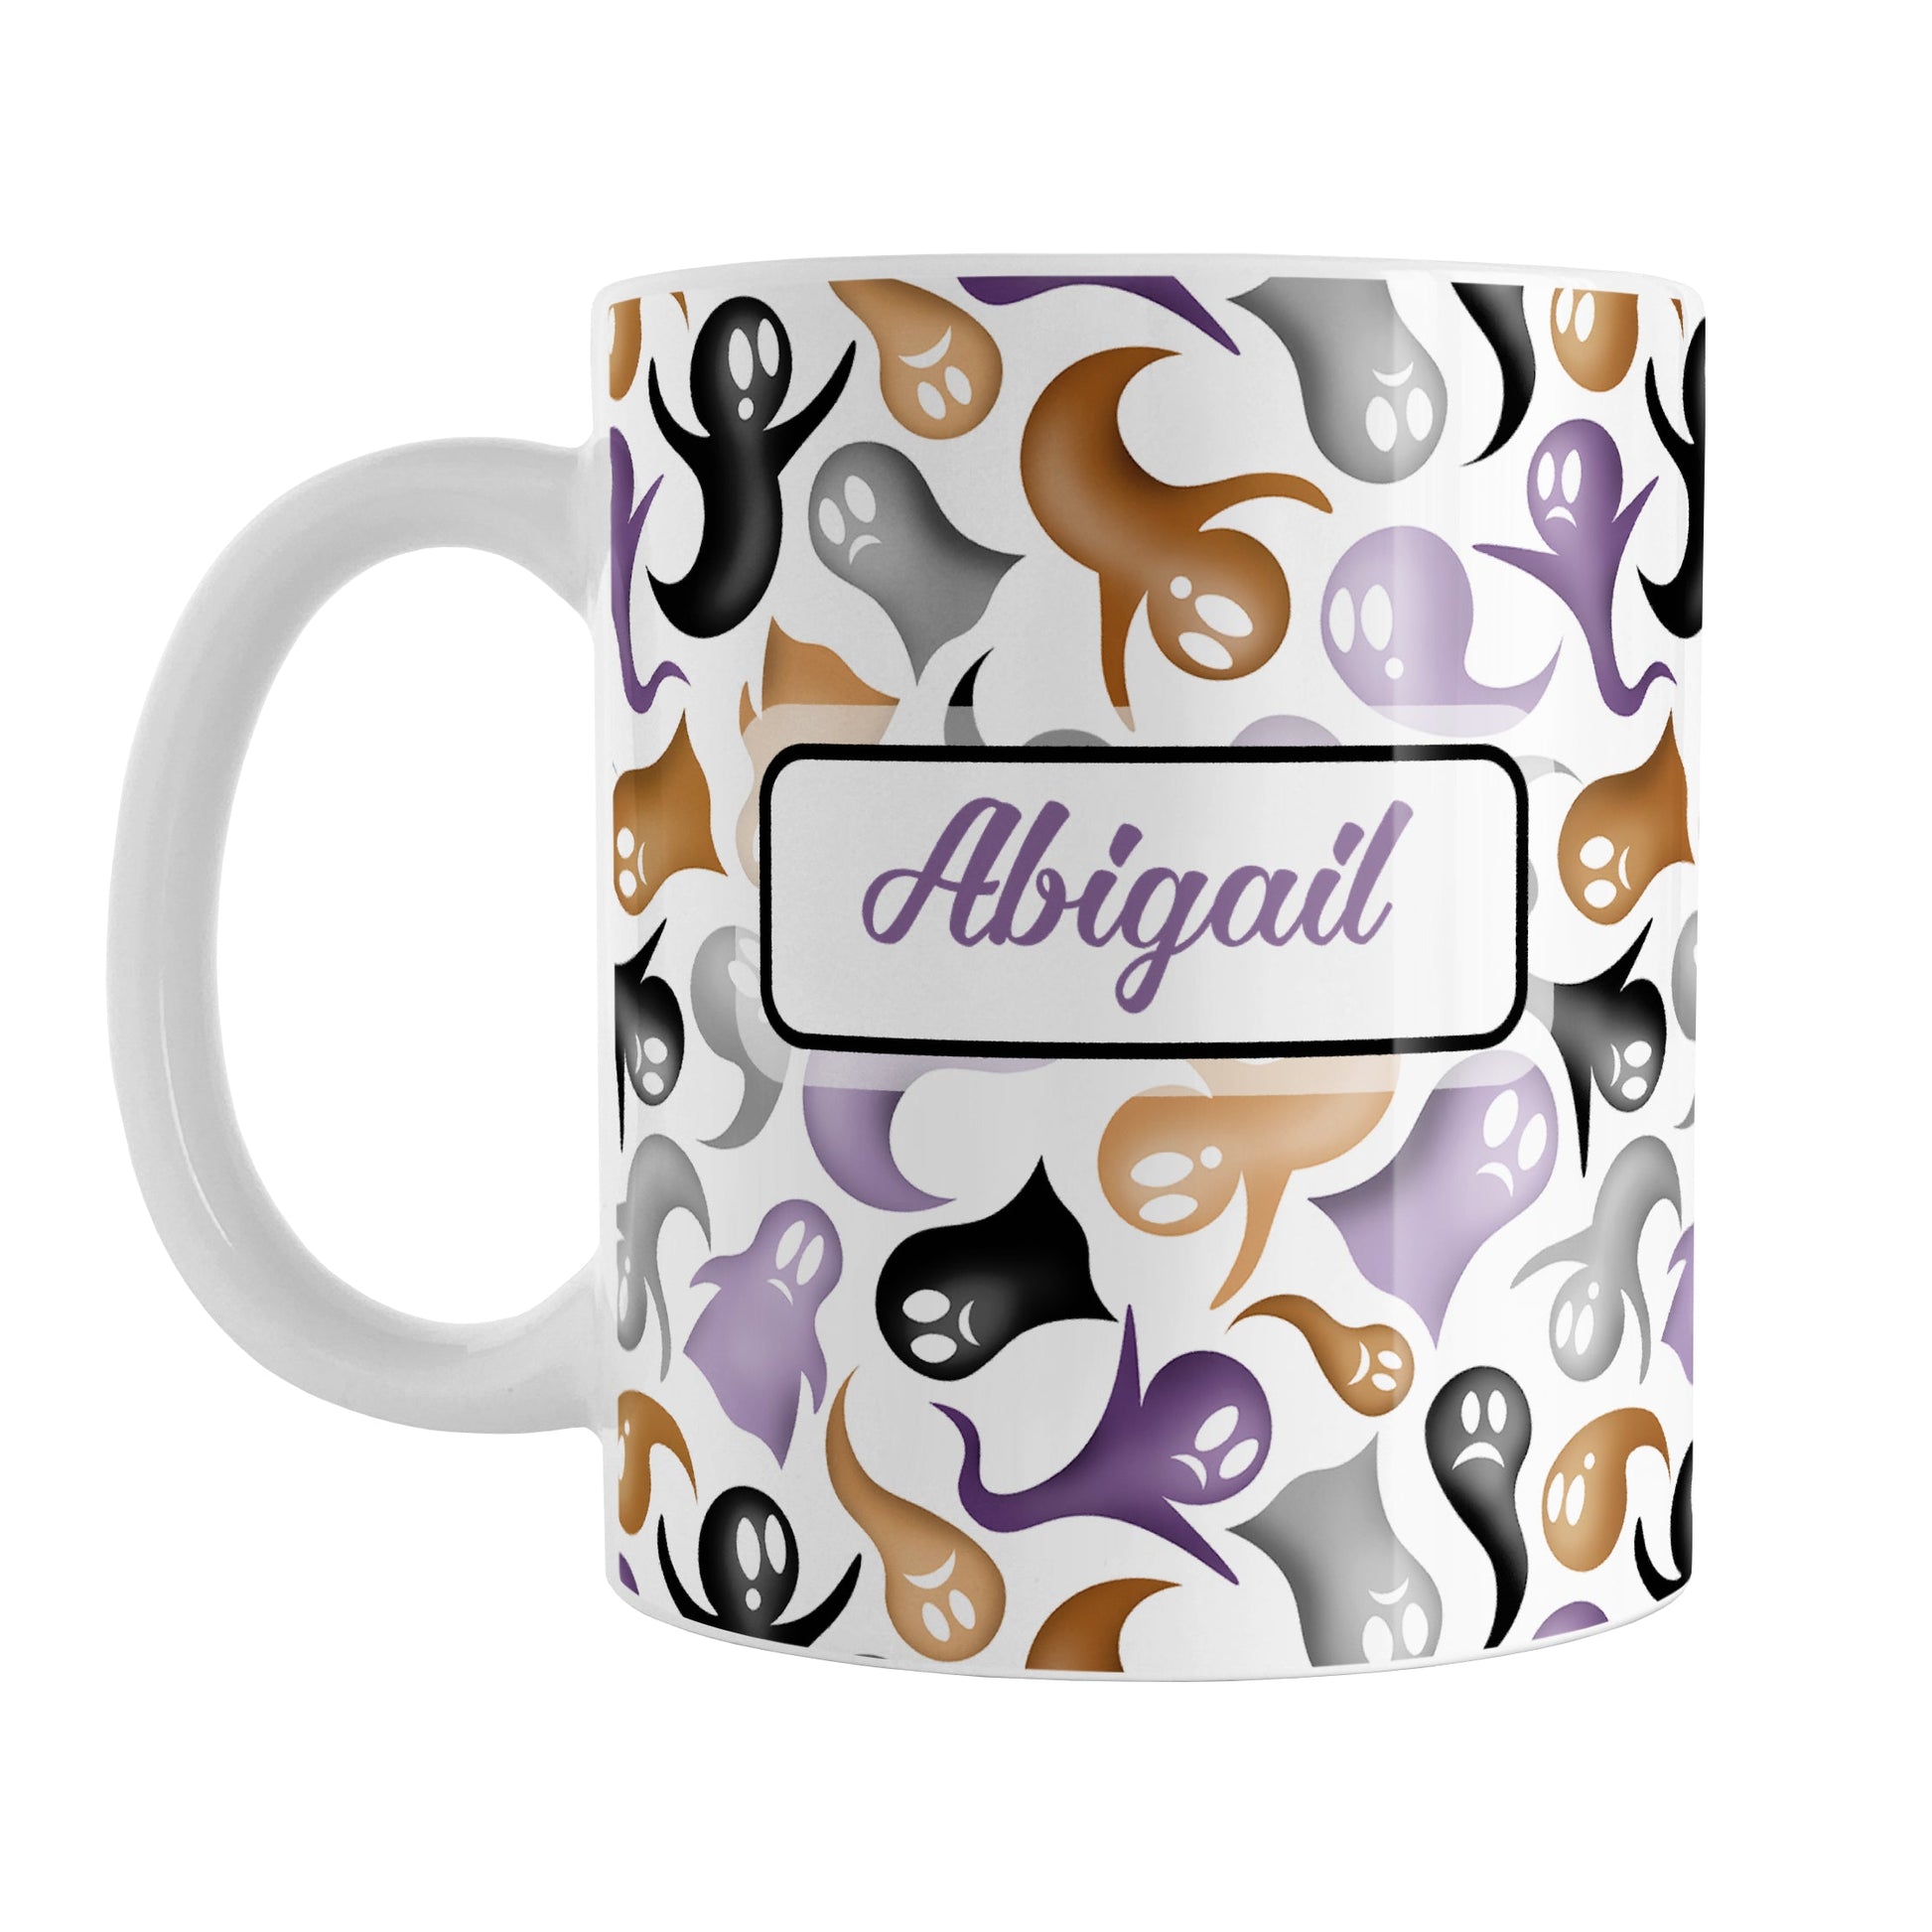 Personalized Ghosts and Spirits Halloween Mug (11oz) at Amy's Coffee Mugs. A ceramic coffee mug designed with a whimsical pattern of purple, orange, black and gray ghosts and spirits that wraps around the mug to the handle. Your personalized name is custom printed in a purple script font on both sides of the mug over the Halloween pattern.